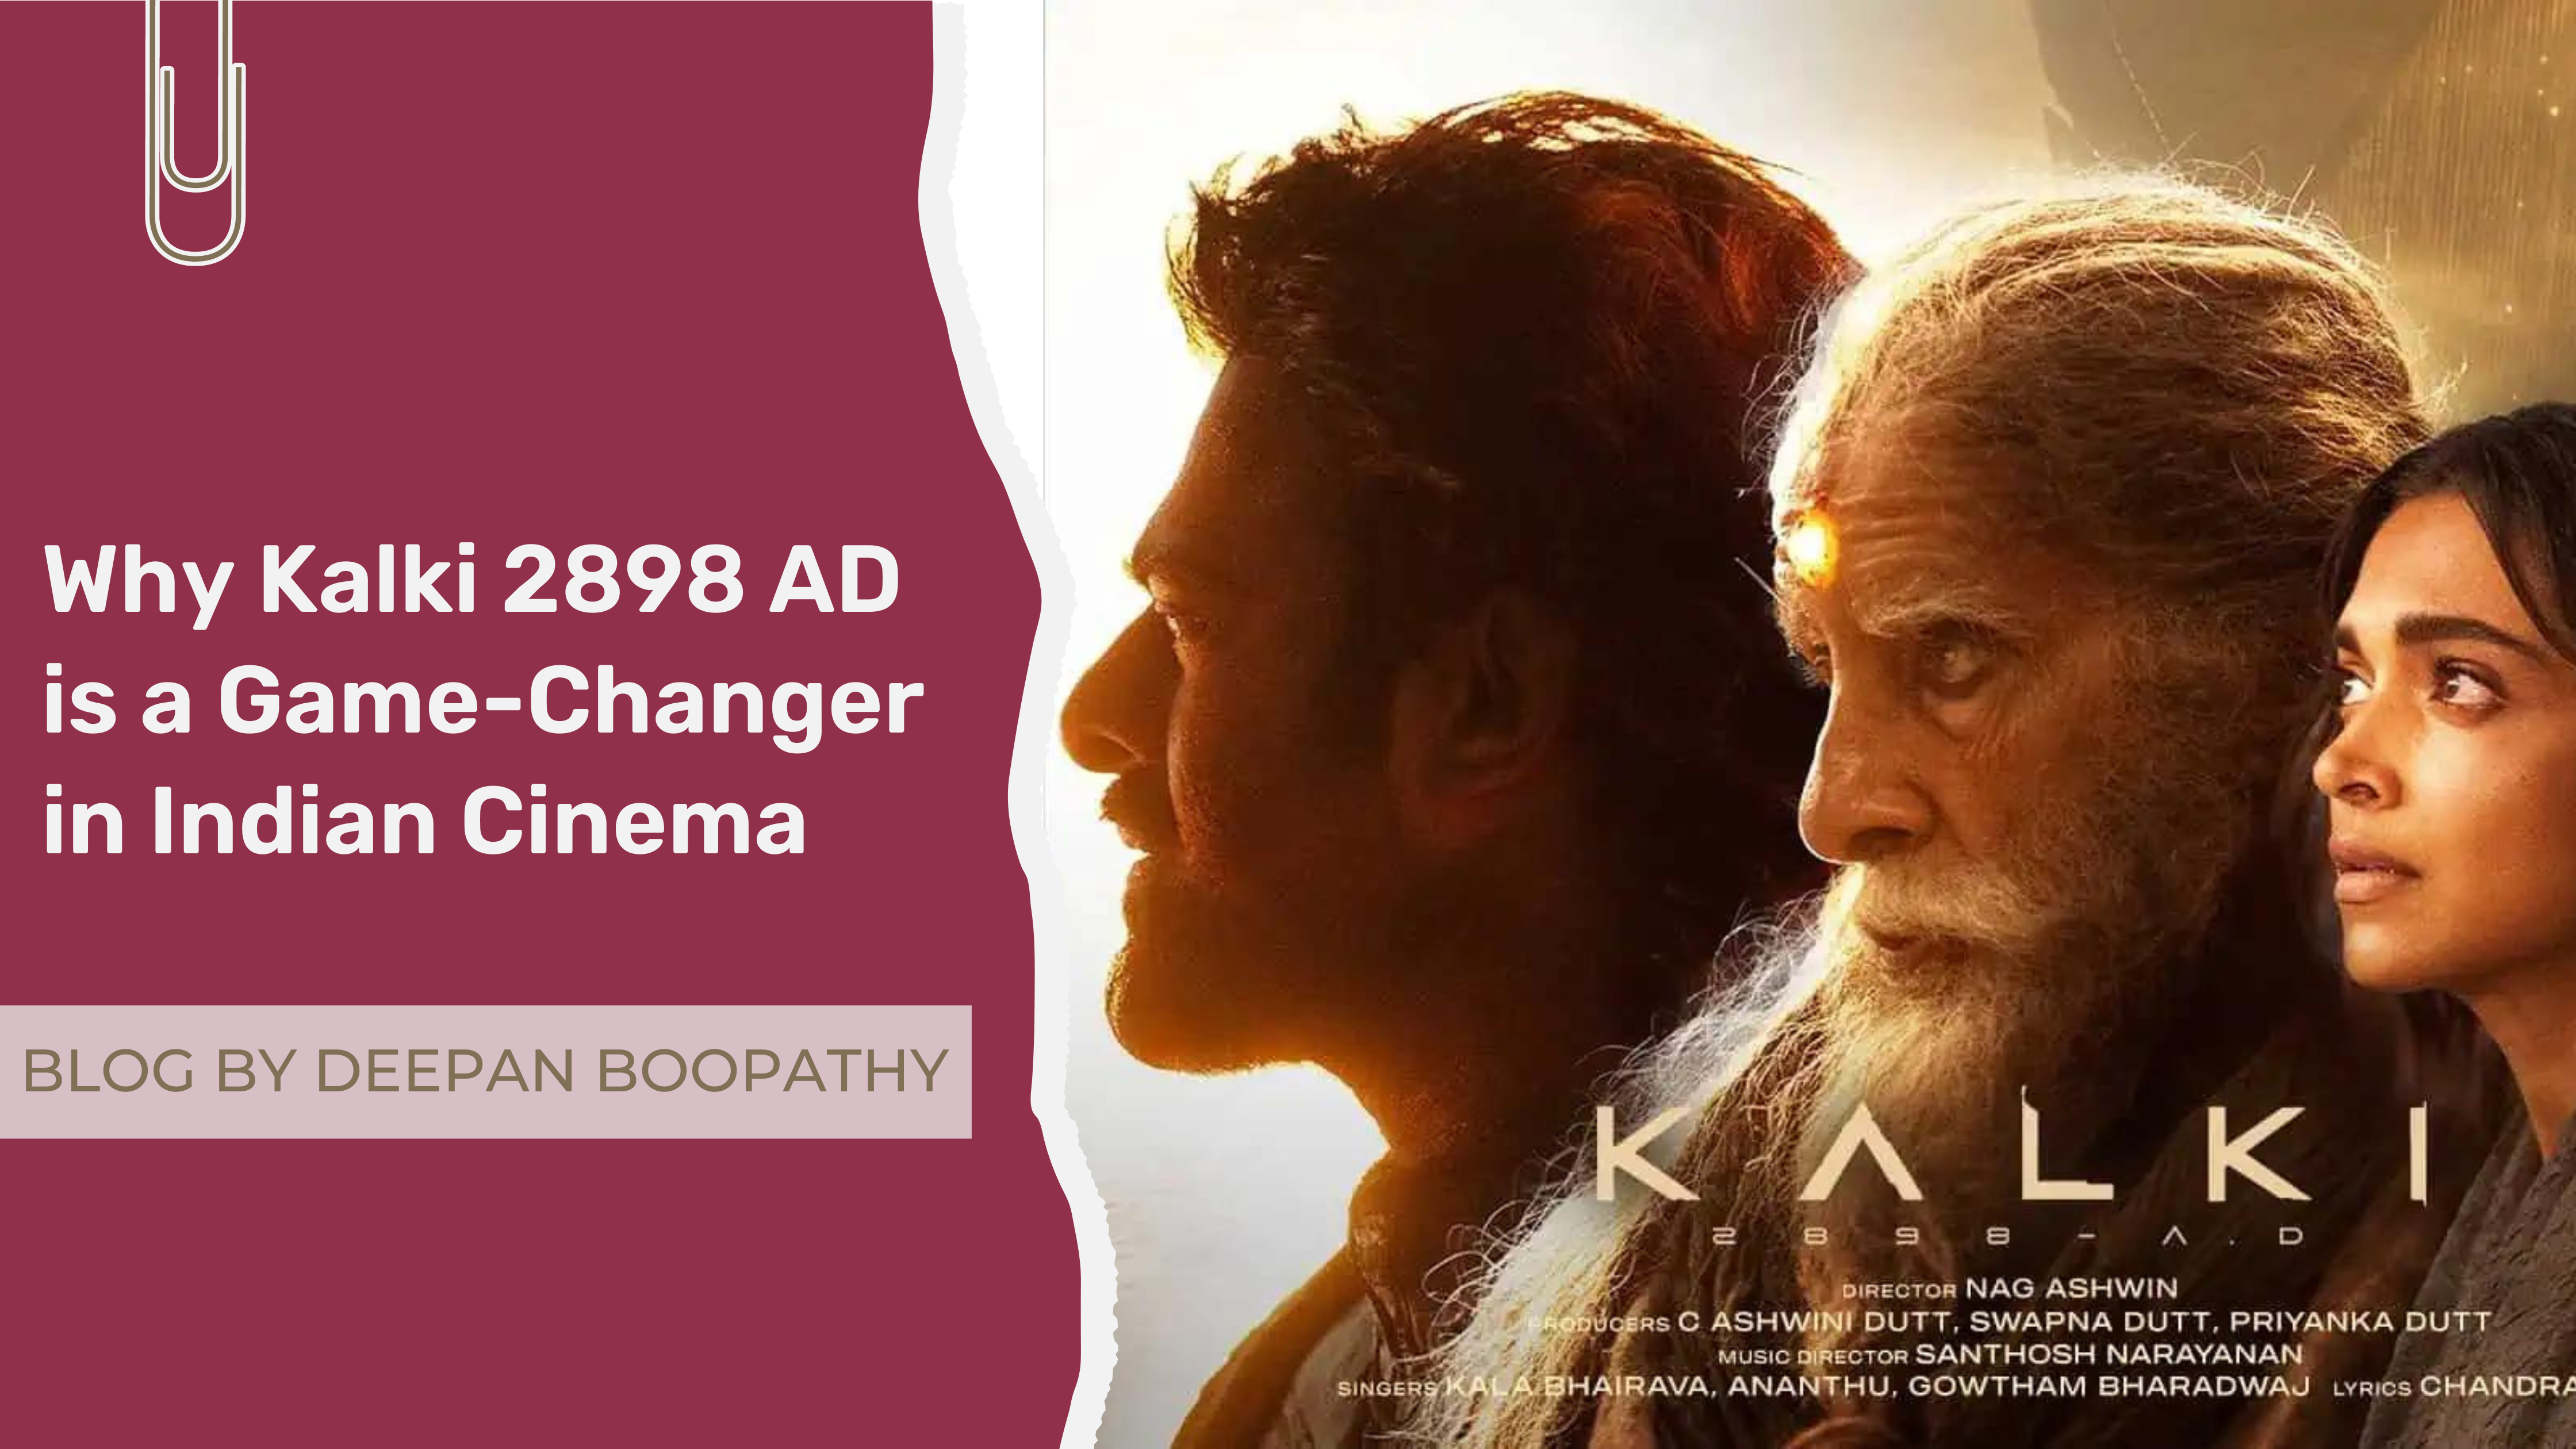 Why Kalki 2898 AD is a Game-Changer in Indian Cinema | Deepan Boopathy